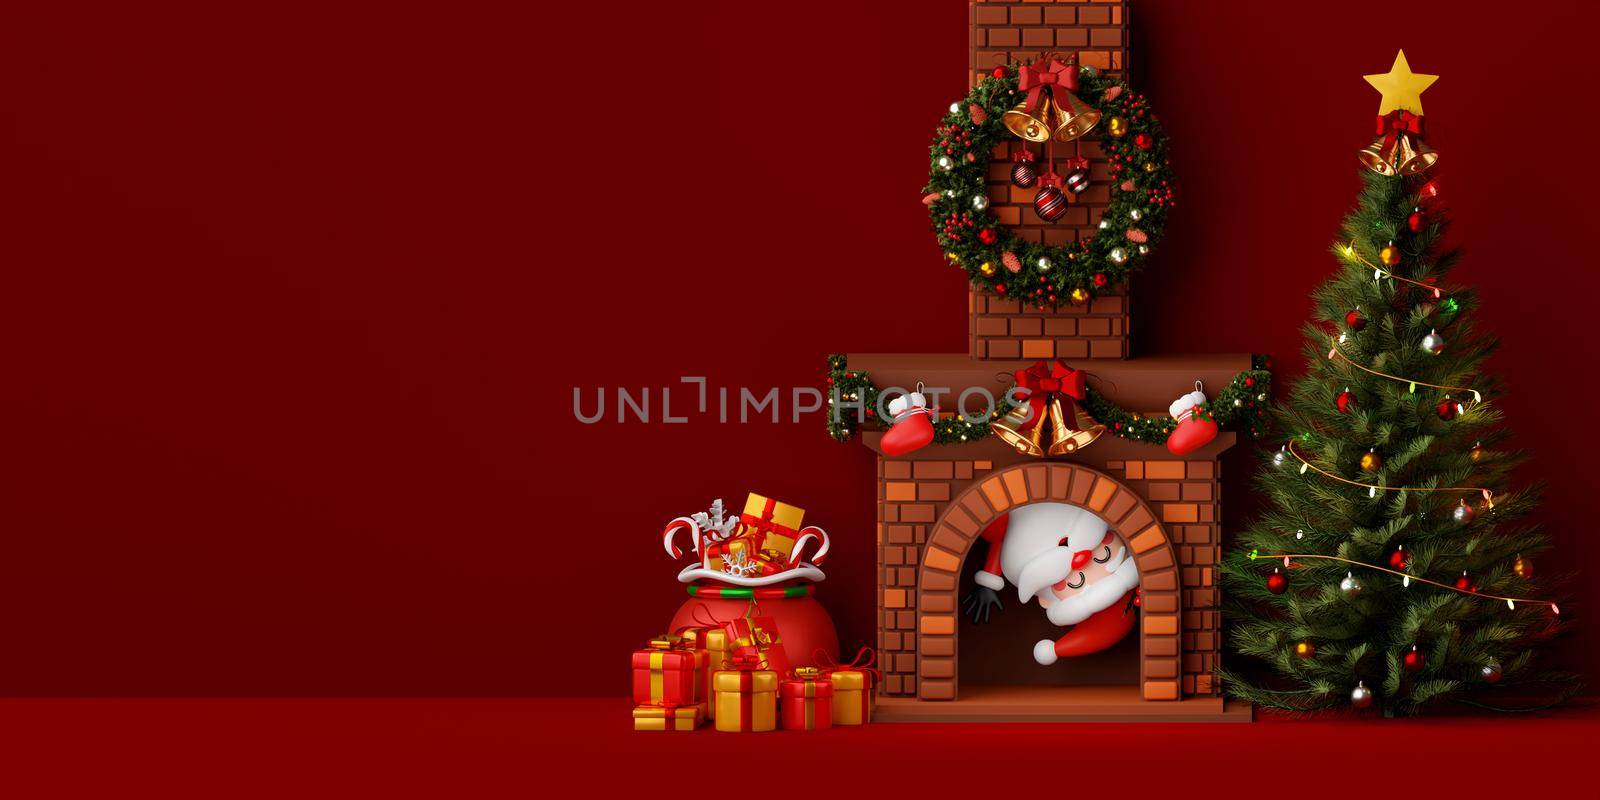 Santa Claus in fireplace in room decorated by Christmas tree and gift box, 3d illustration by nutzchotwarut